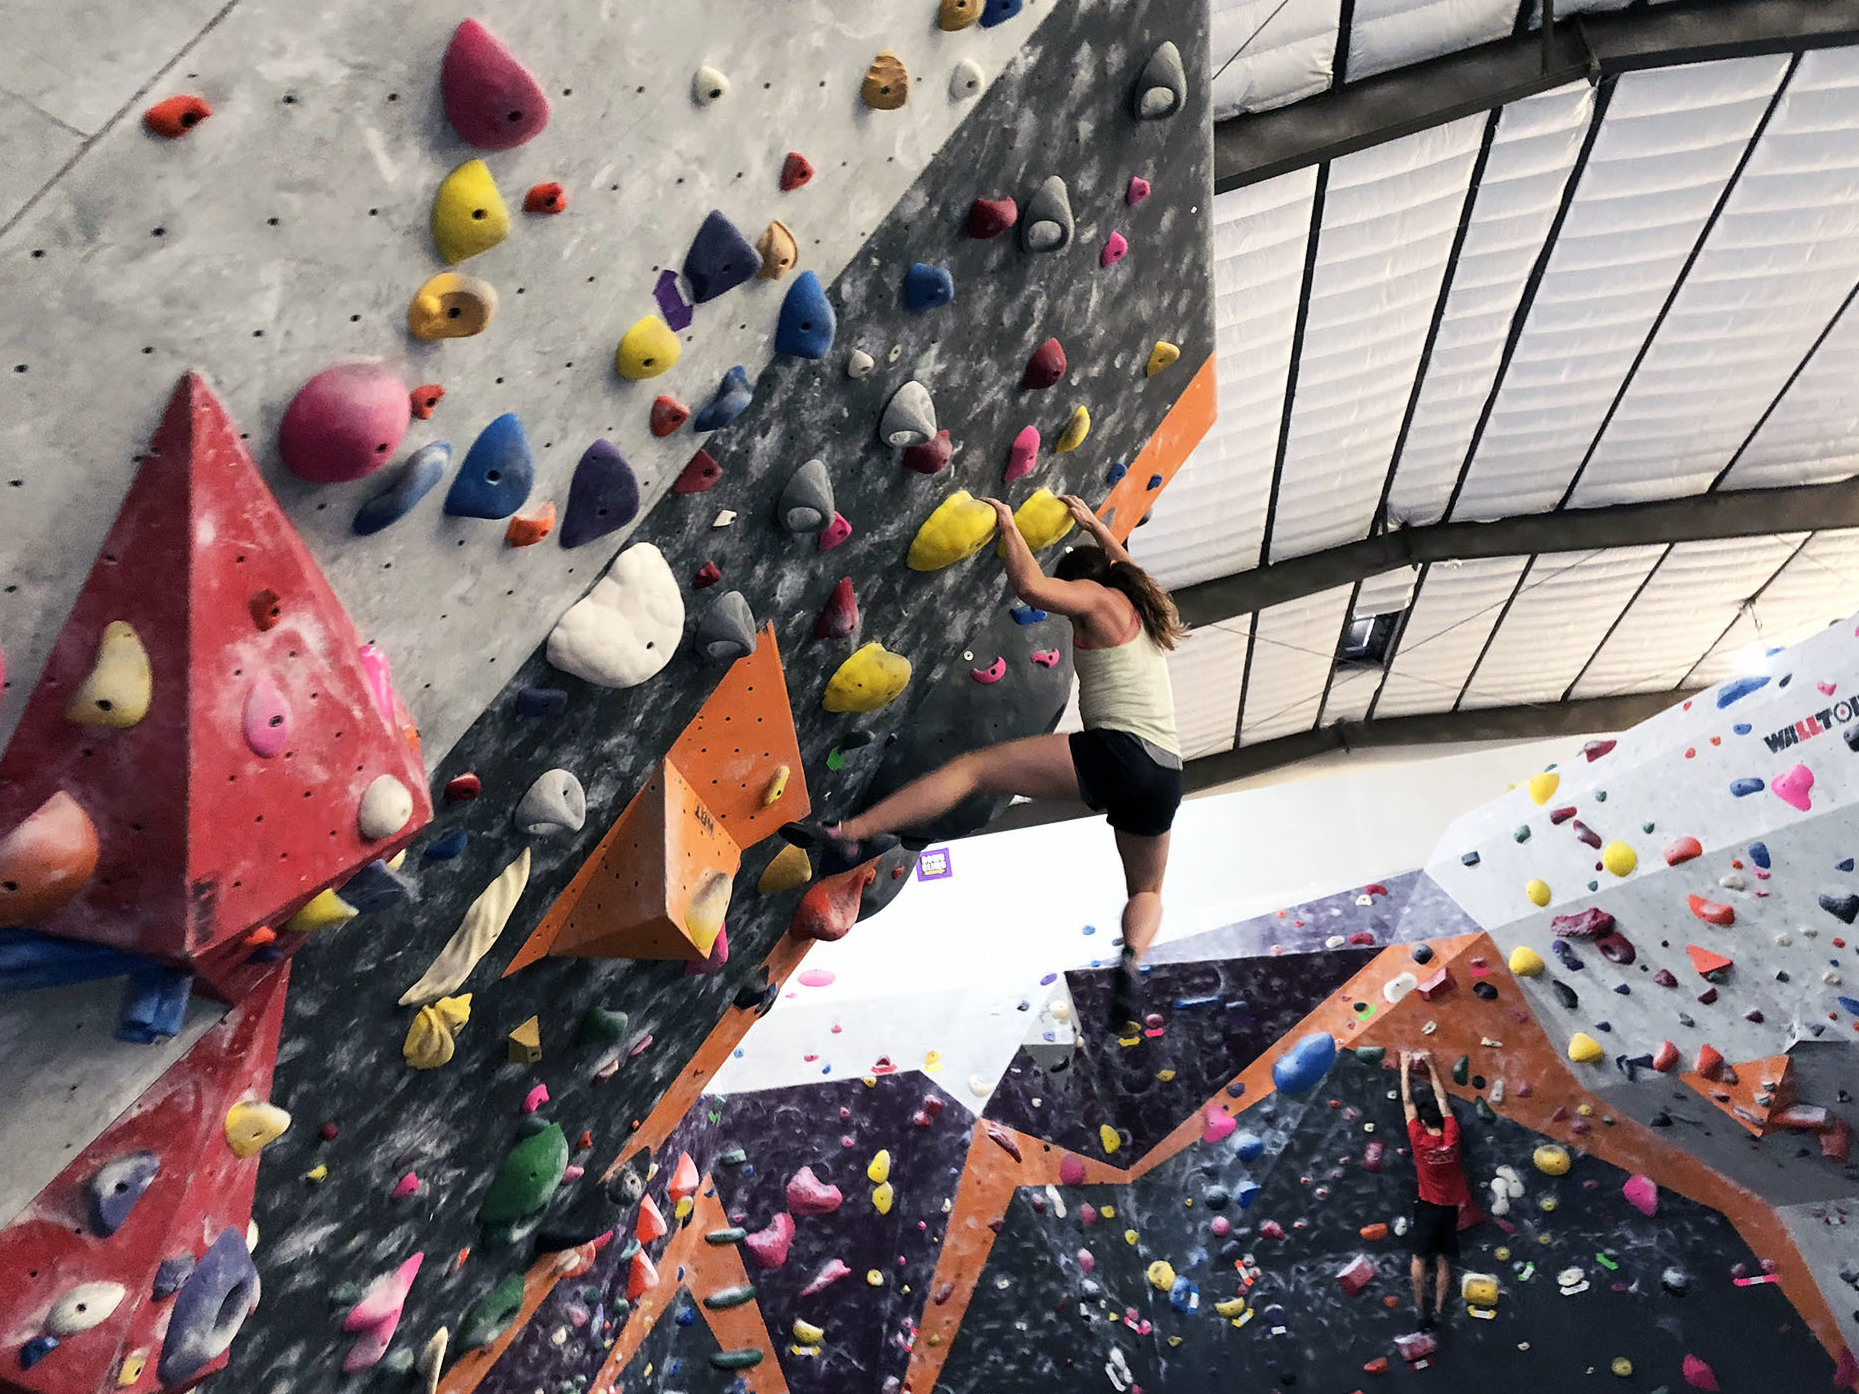 Rock climbing gyms have changed rock climbing in Yosemite, from who climbs to how they climb. Hannah Hall climbs at Pipeworks in Sacramento. She said that climbing at the gym has made her a lot stronger while climbing outdoors.